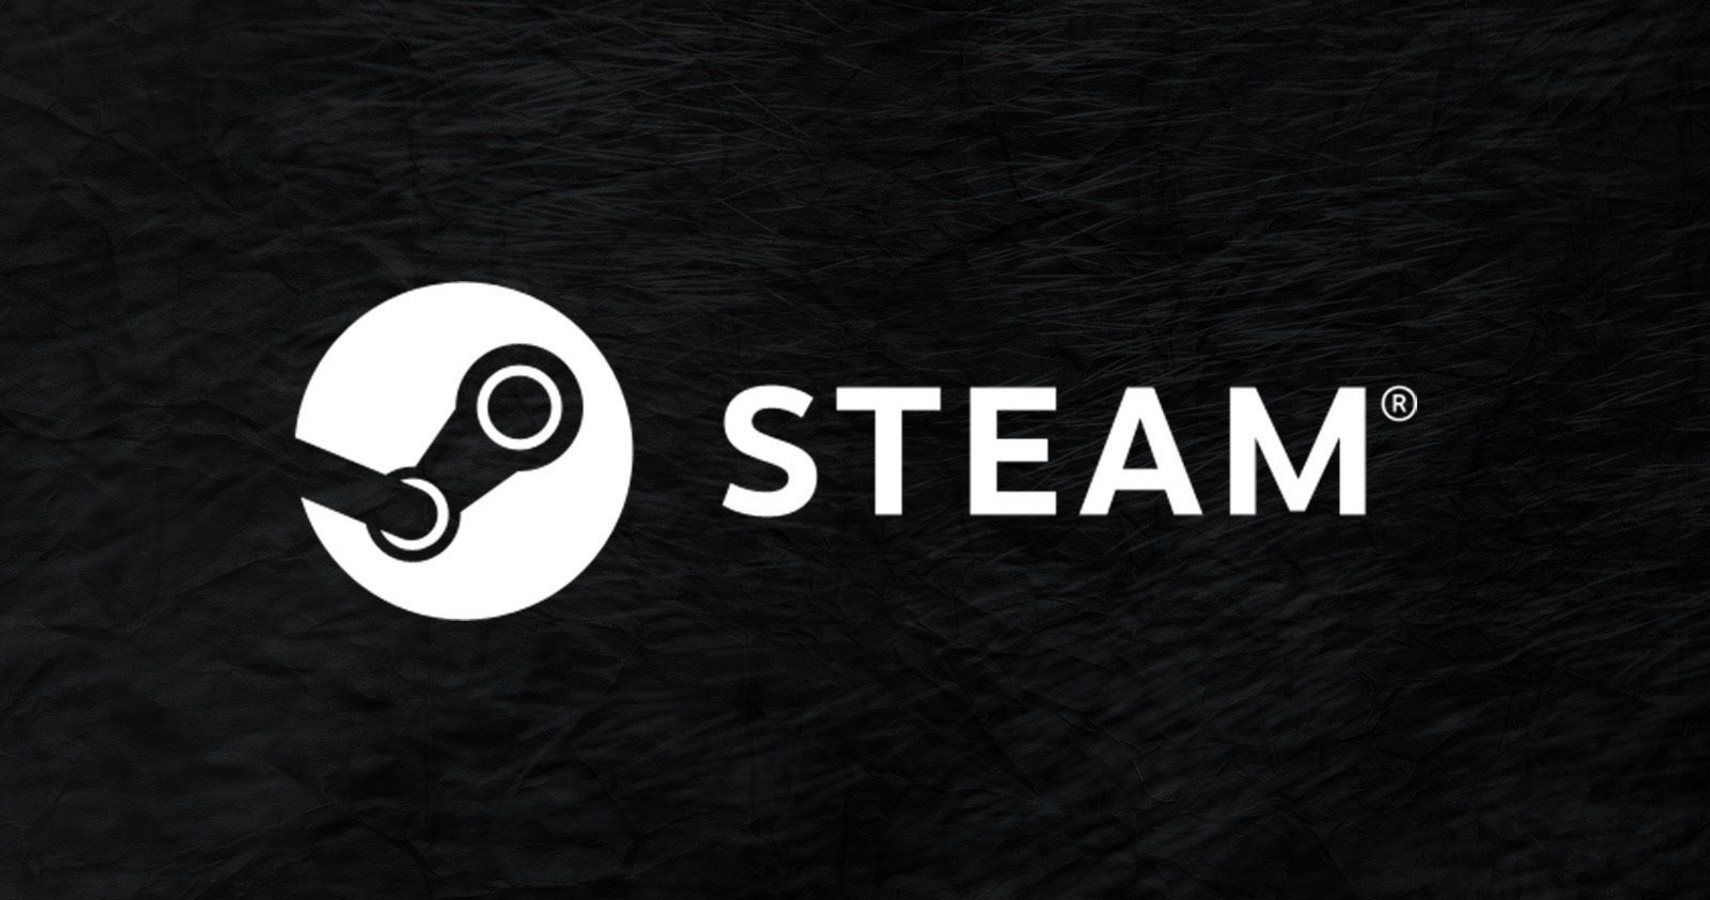 Valve Takes Hands-On Approach To Deal With Review Bombing With New Steam Tool - But There May Be Consequences